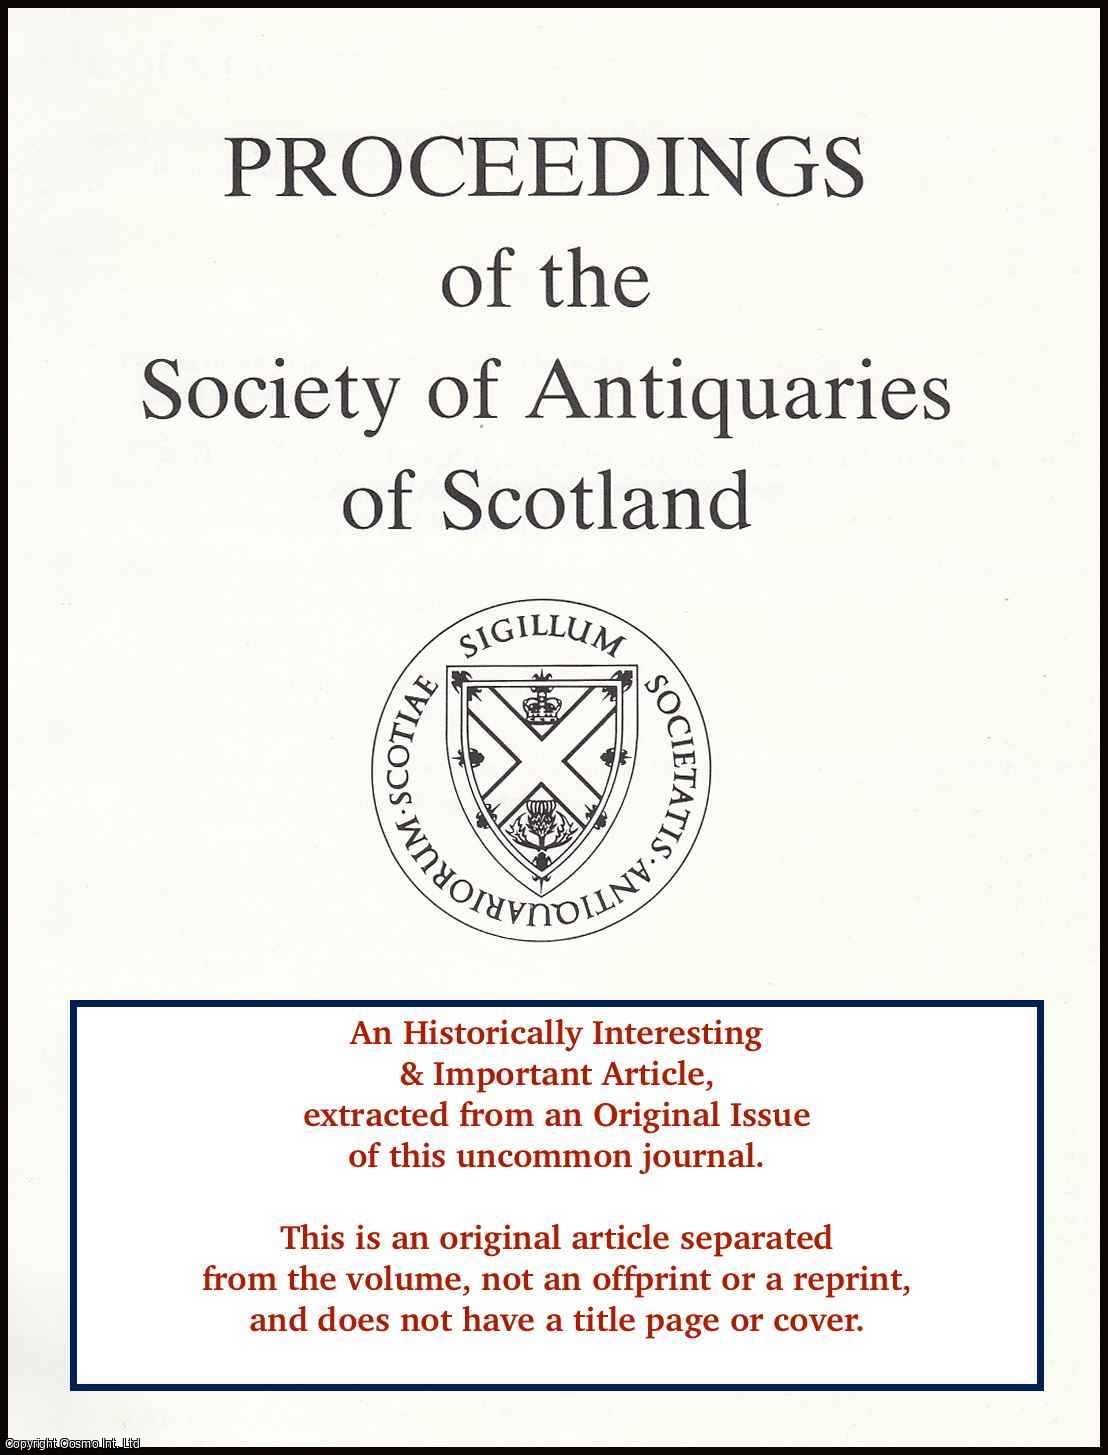 John Lewis, Helen Smith, I. Cullen, J. Franklin, G. Haggarty & J. Thoms - Excavations at Inverlochy Castle, Inverness-Shire, 1983-95. An original article from the Proceedings of the Society of Antiquaries of Scotland, 1998.